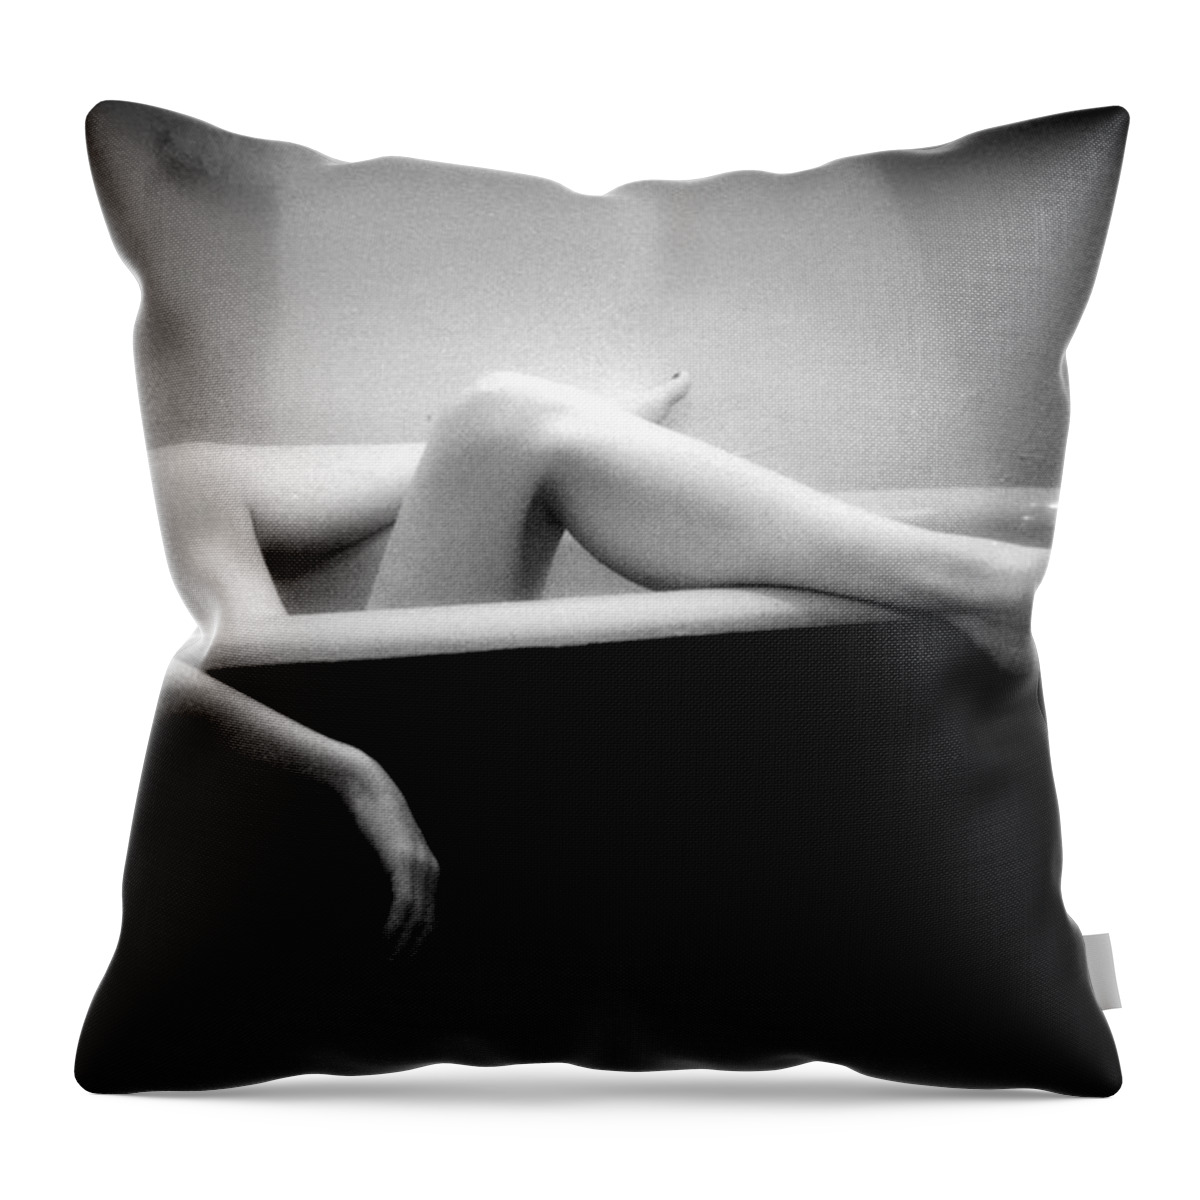 Female Nude Throw Pillow featuring the photograph Melting by Lindsay Garrett